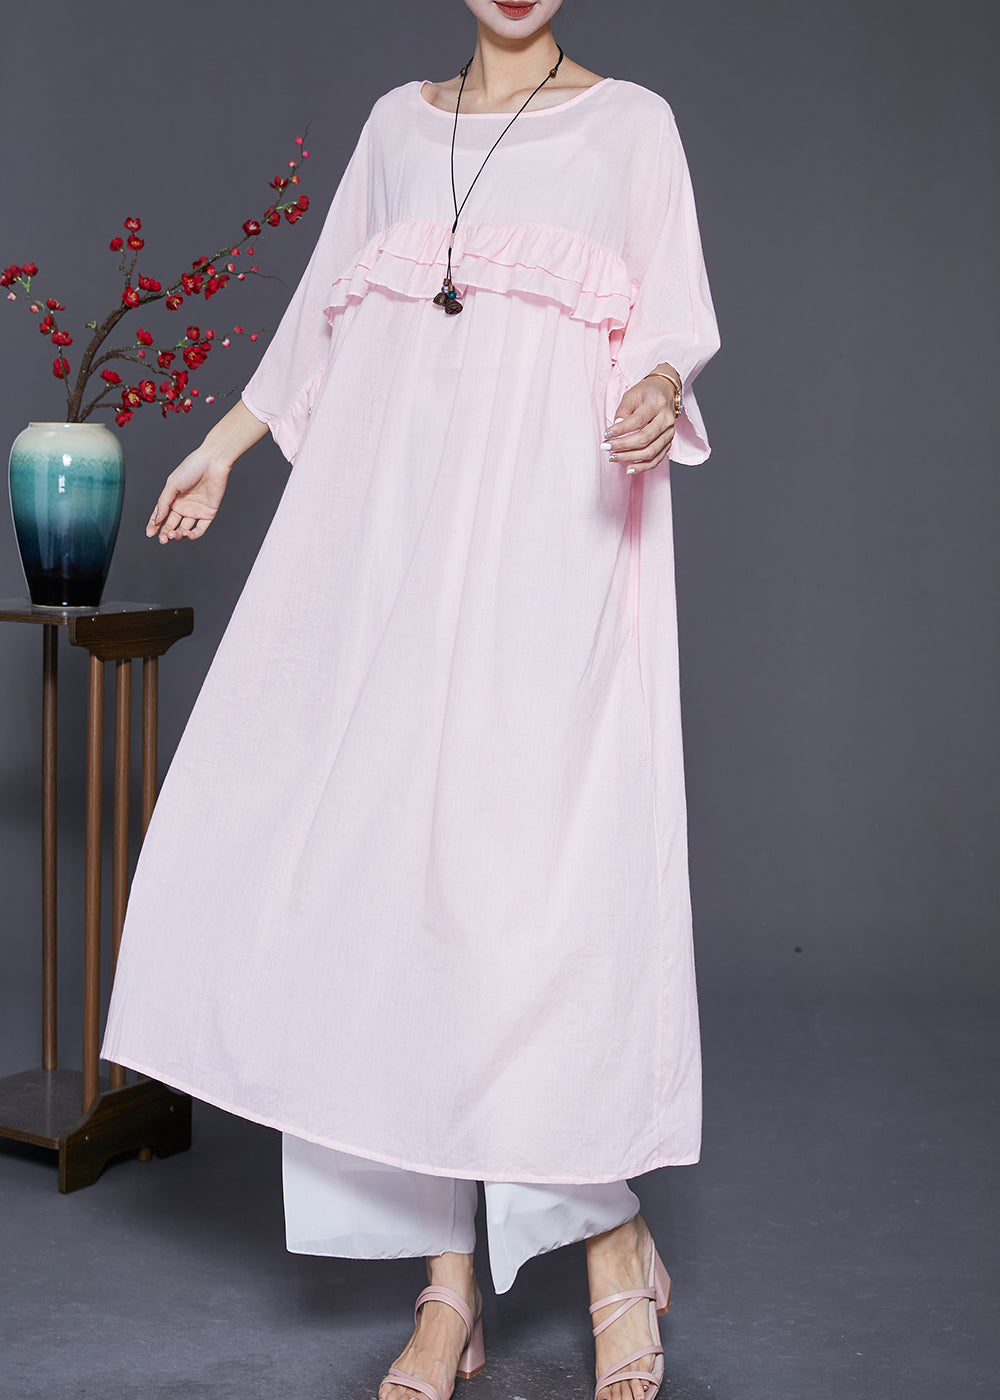 Natural Pink Ruffled Patchwork Linen Robe Dresses Batwing Sleeve Ada Fashion